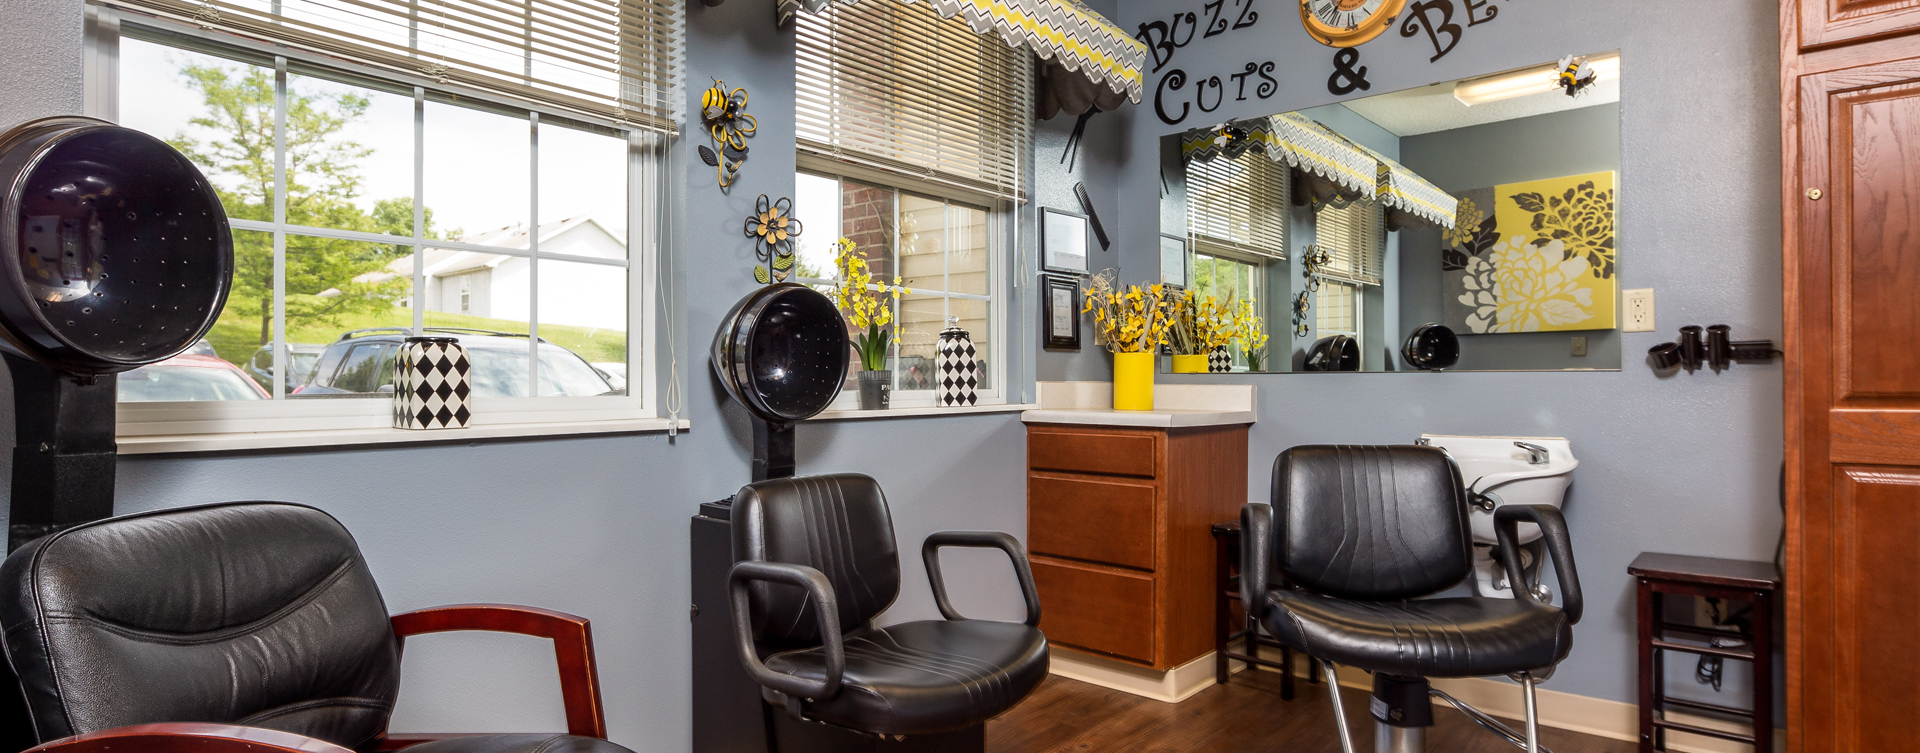 Receive personalized, at-home treatment from our stylist in the salon at Bickford of Battle Creek